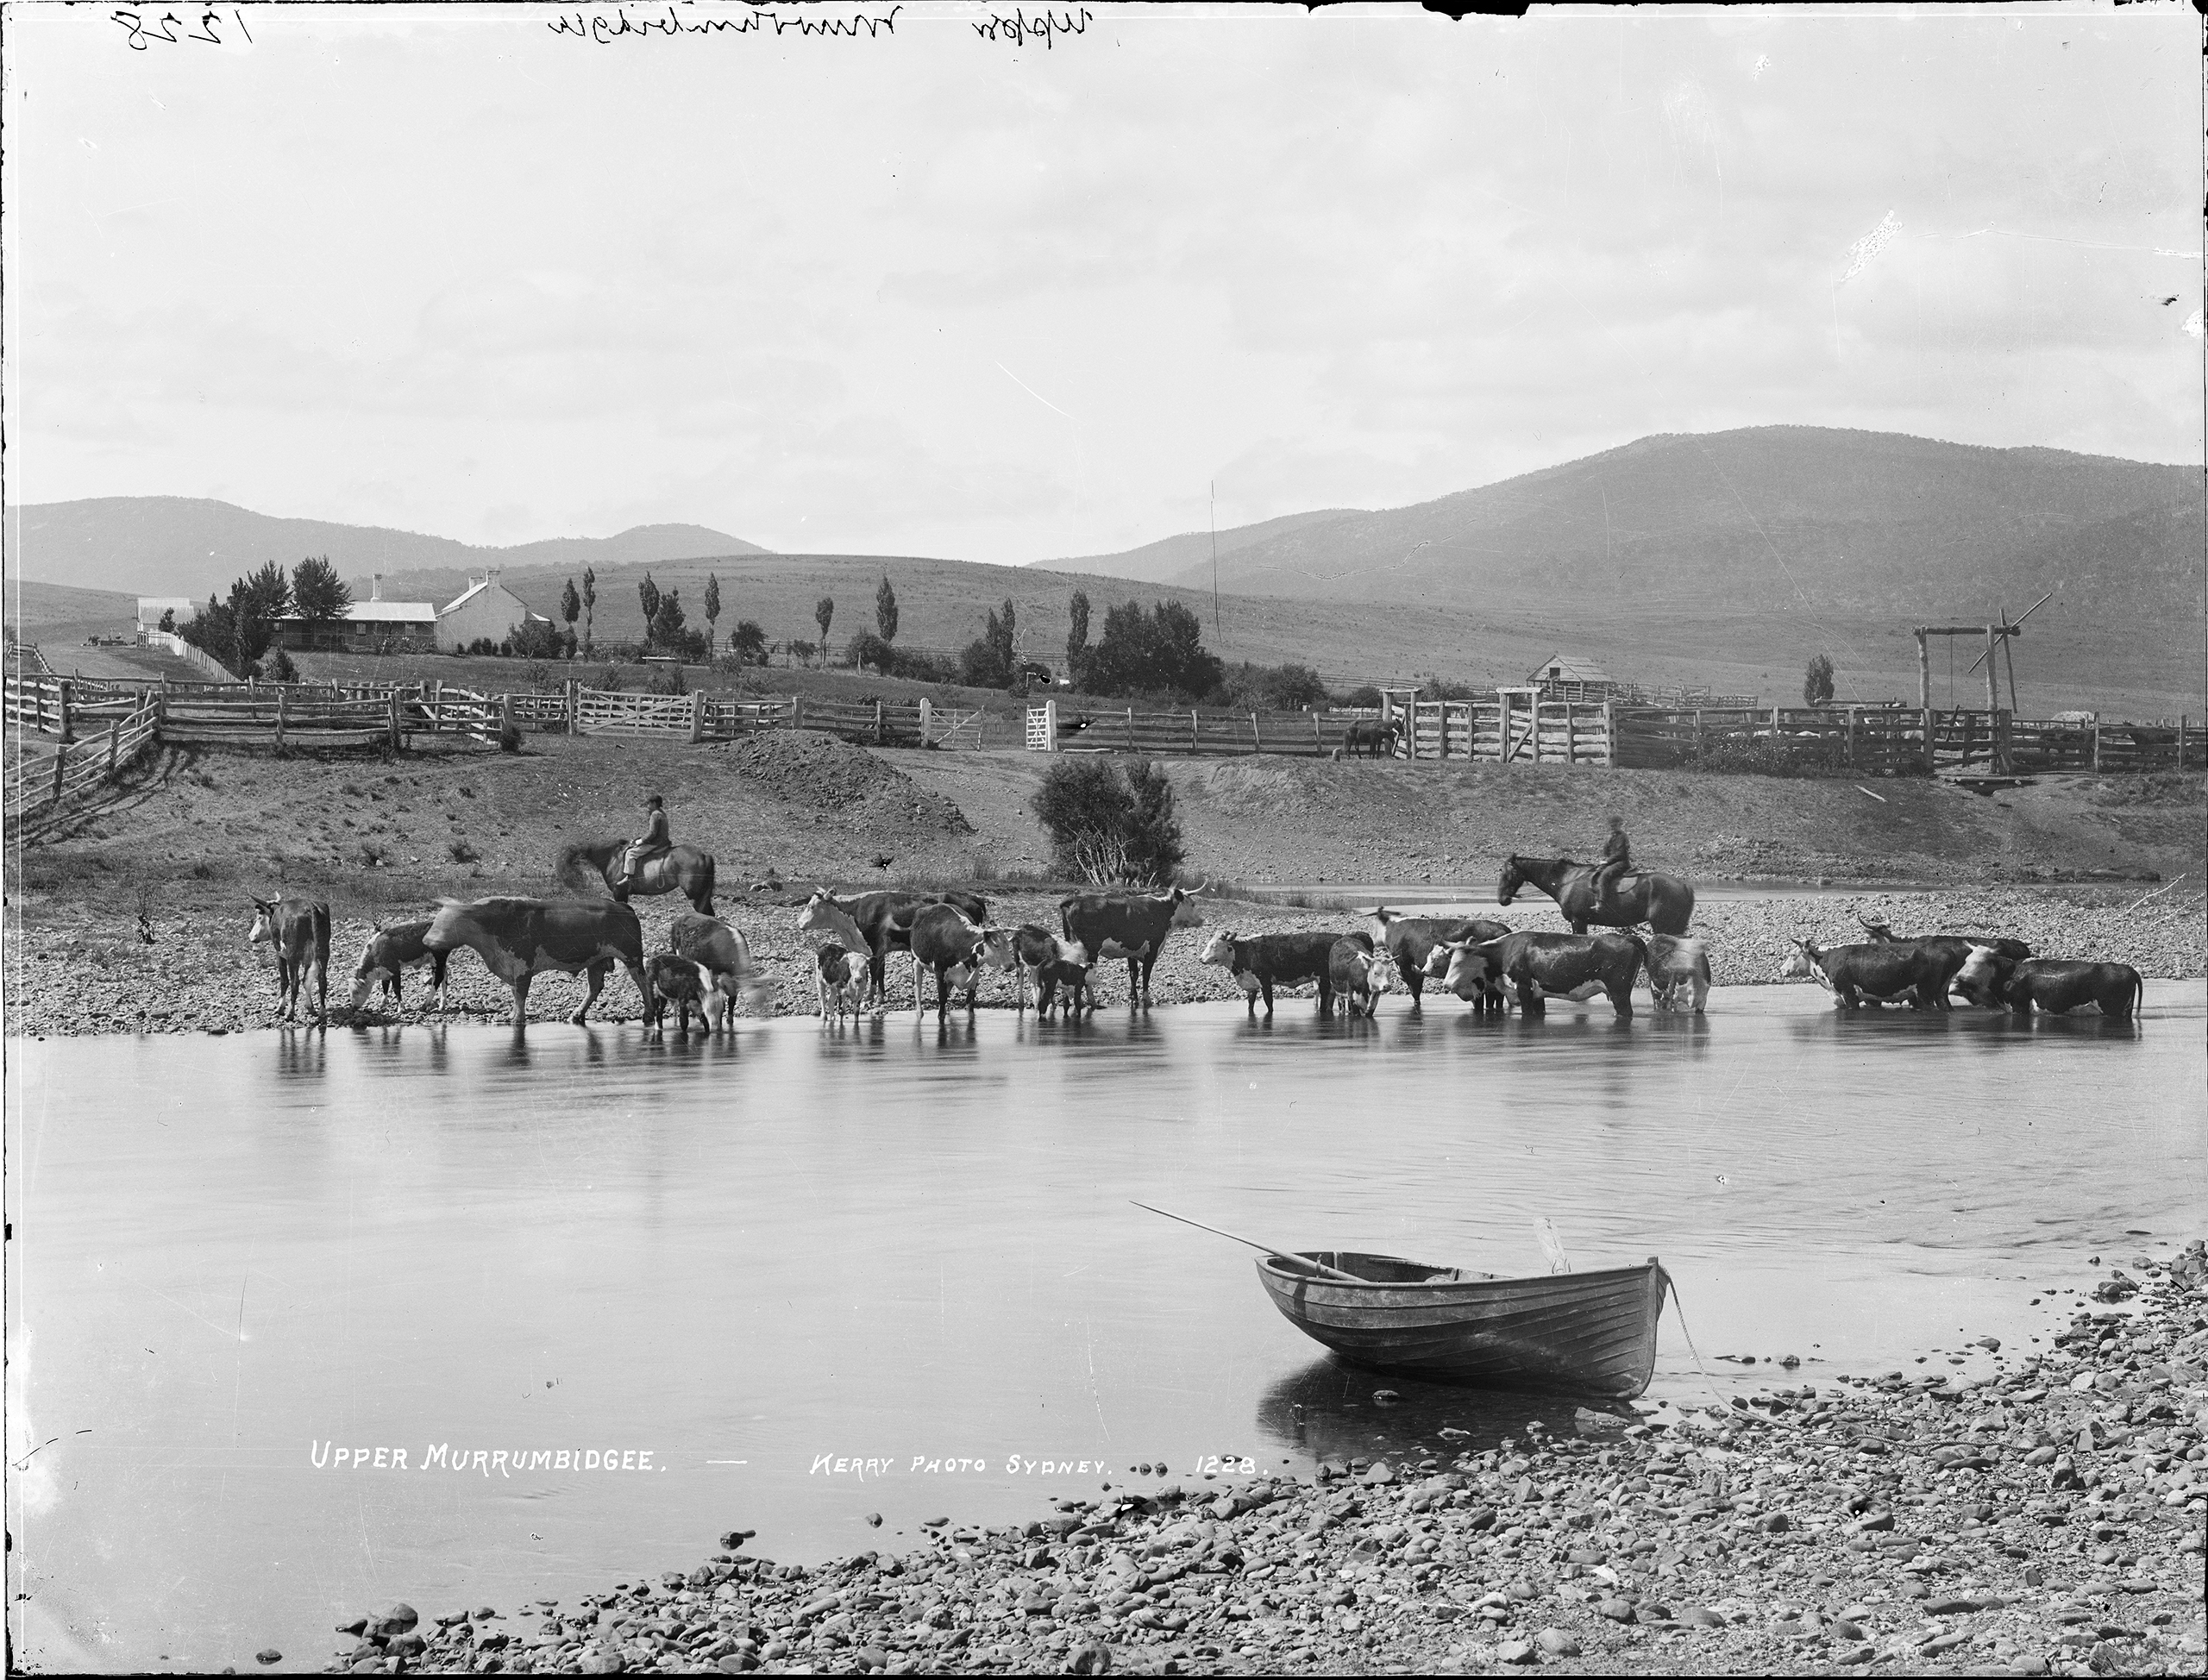 'Upper Murrumbidgee' by Kerry and Co from the Tyrrell Collection